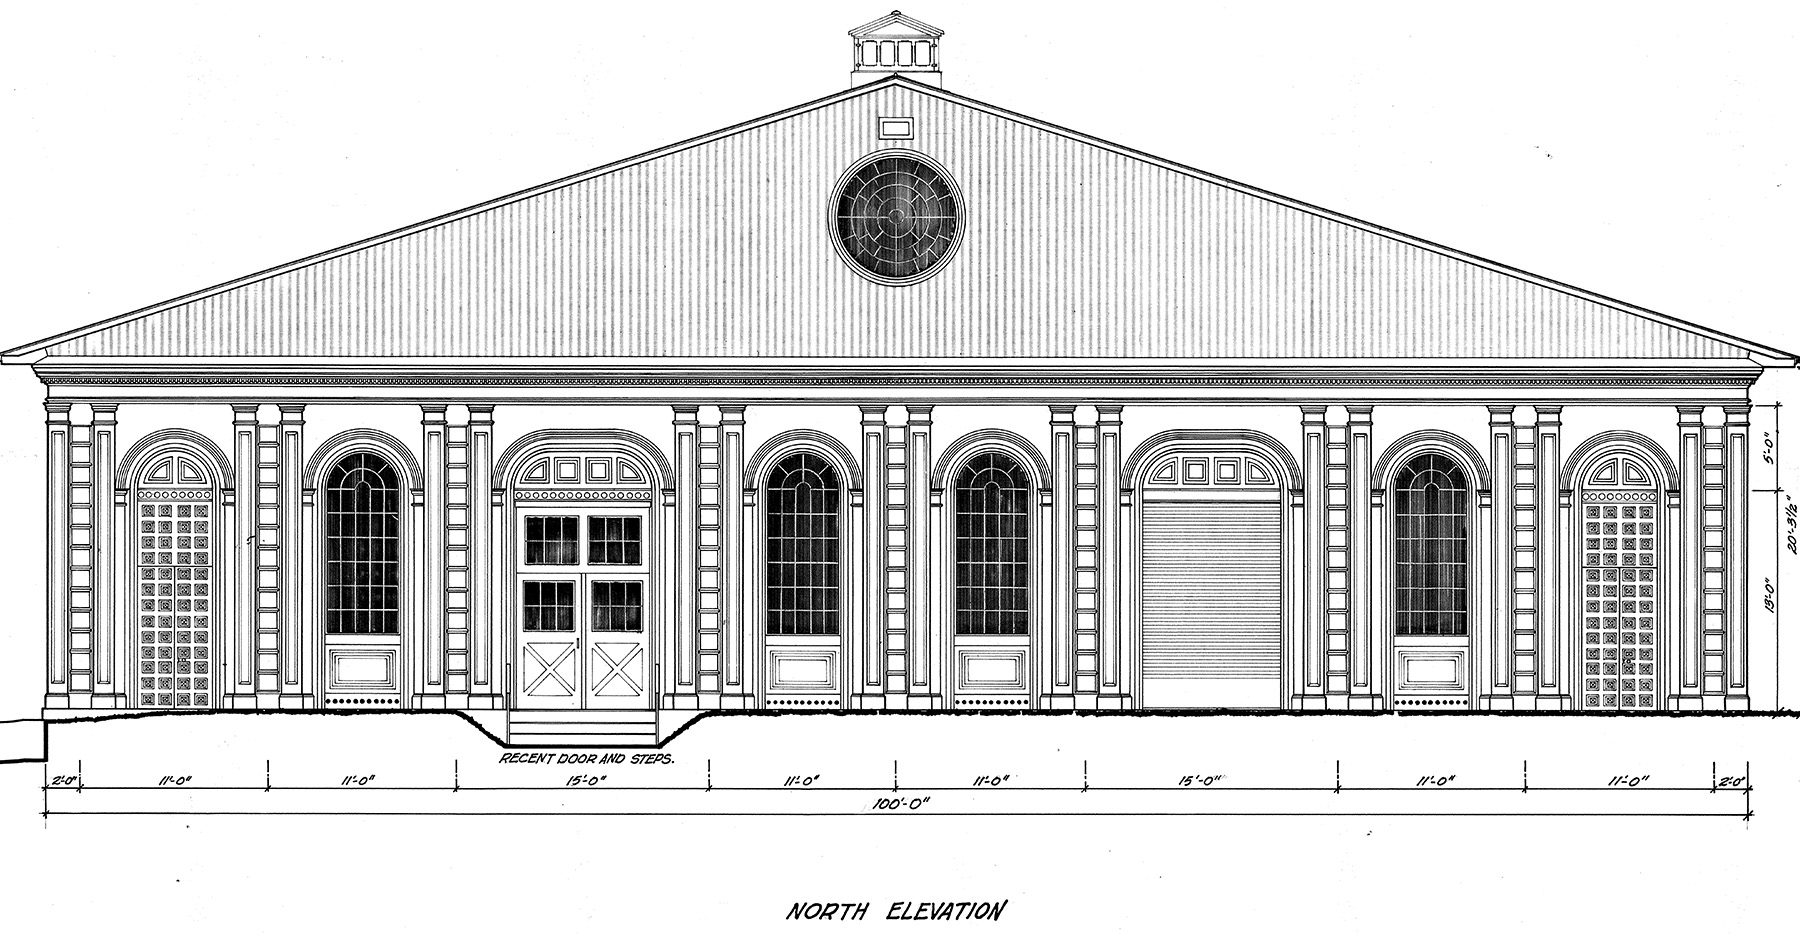 drawing of a building’s north elevation showing four windows and one door. the building has a triangular roof